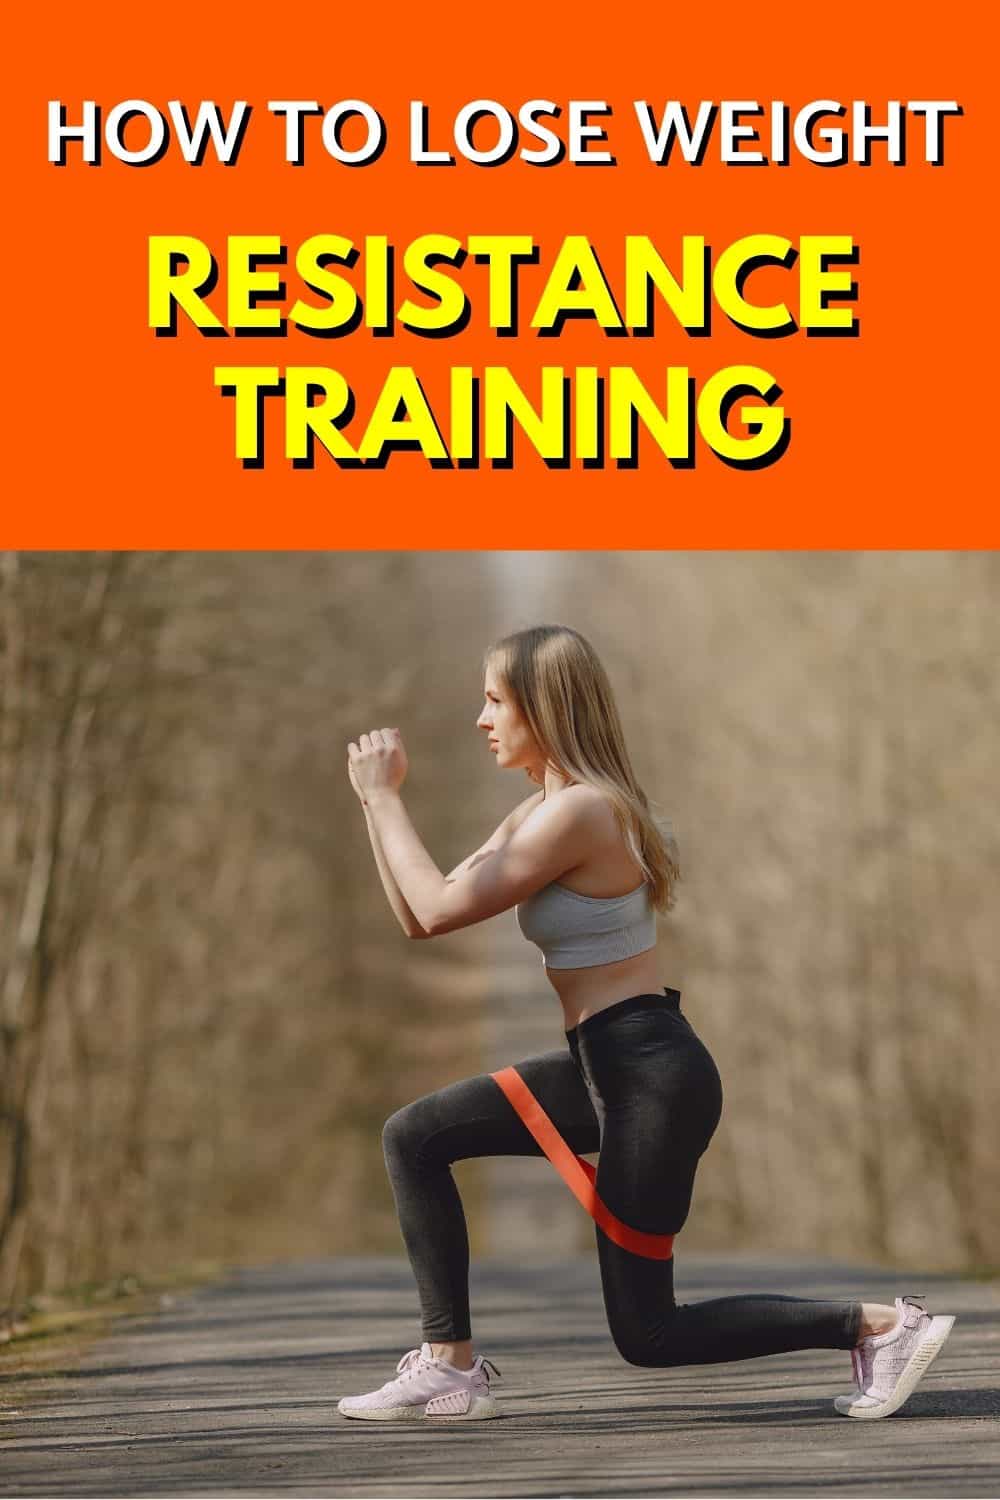 Lose Weight with resistance training. This for of strength training will help you with your weight loss easily. Losing weight is easier with resistance training.